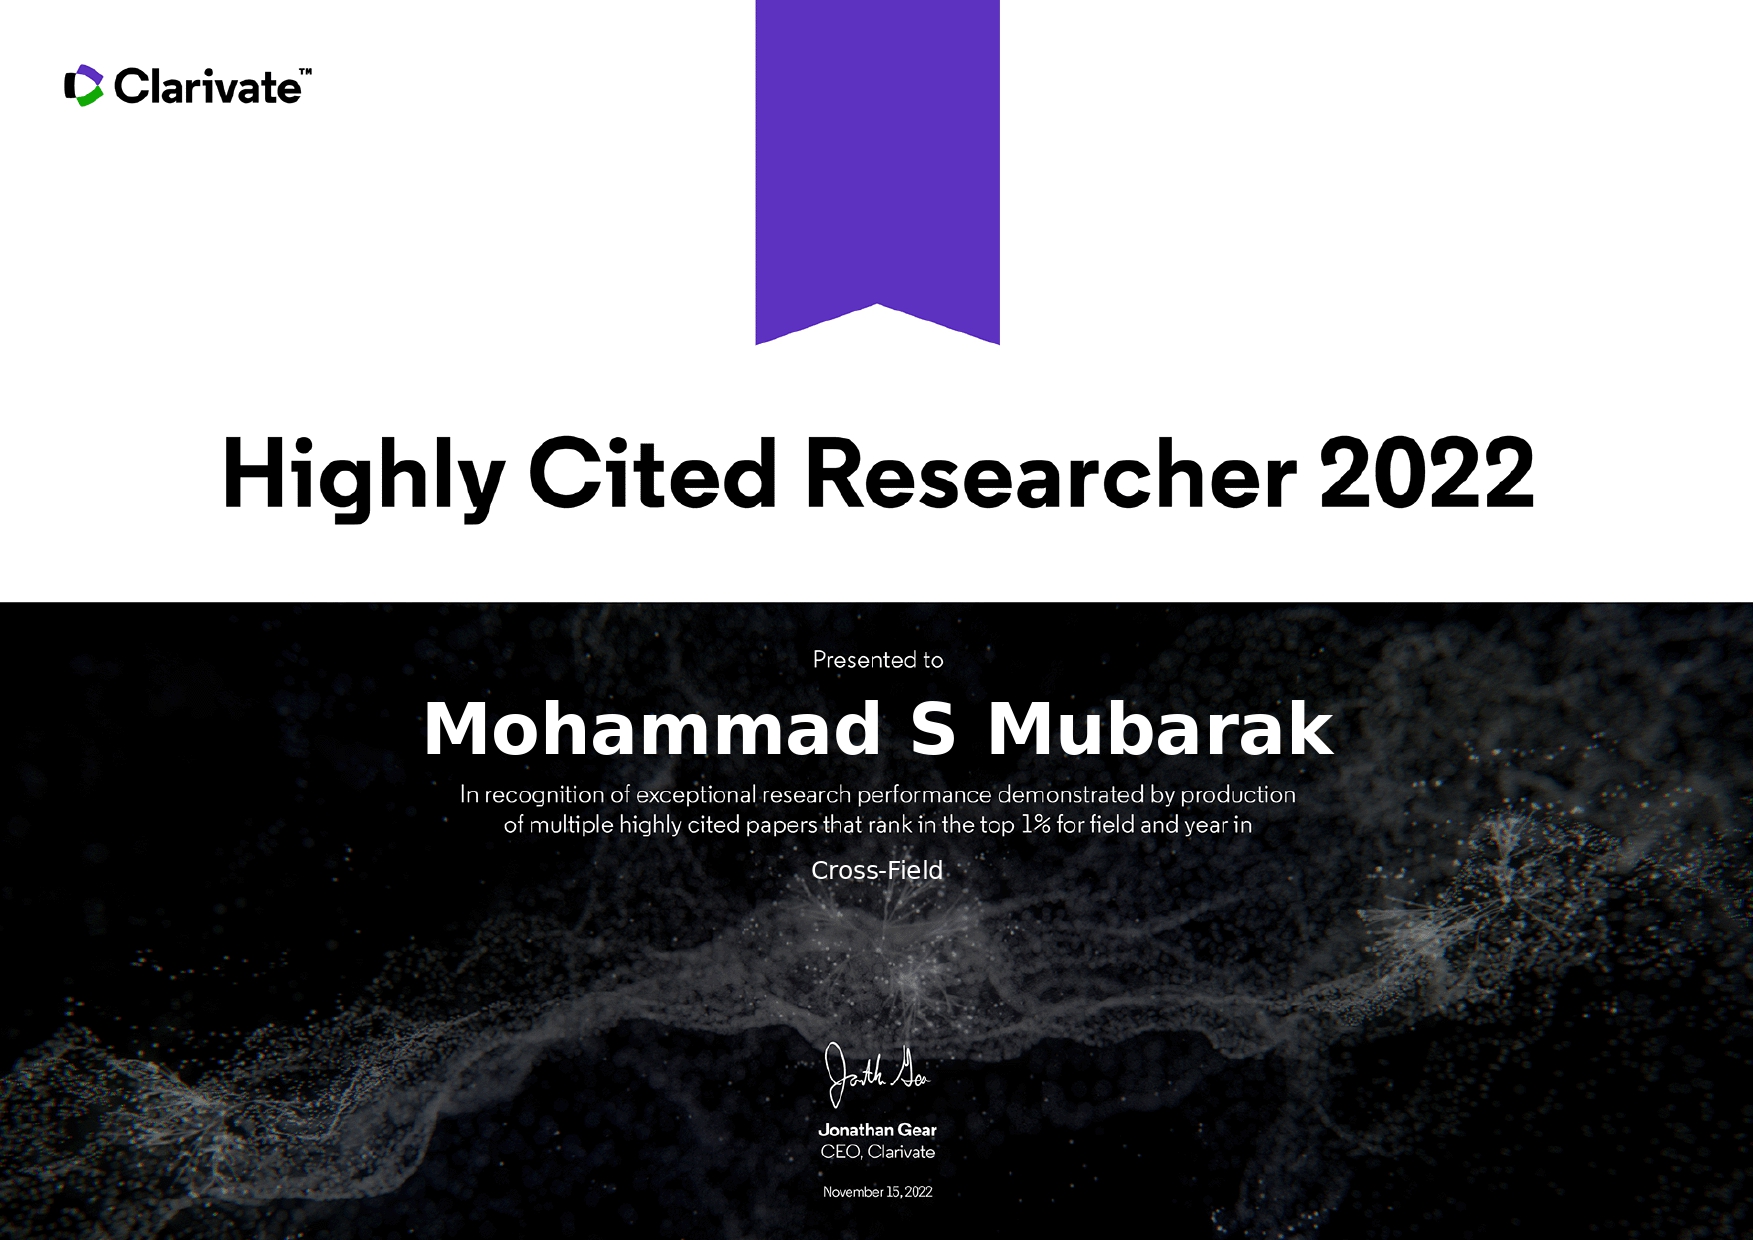 Highly Cited Researcher in the field of Cross-Field (1)_page-0001.jpg